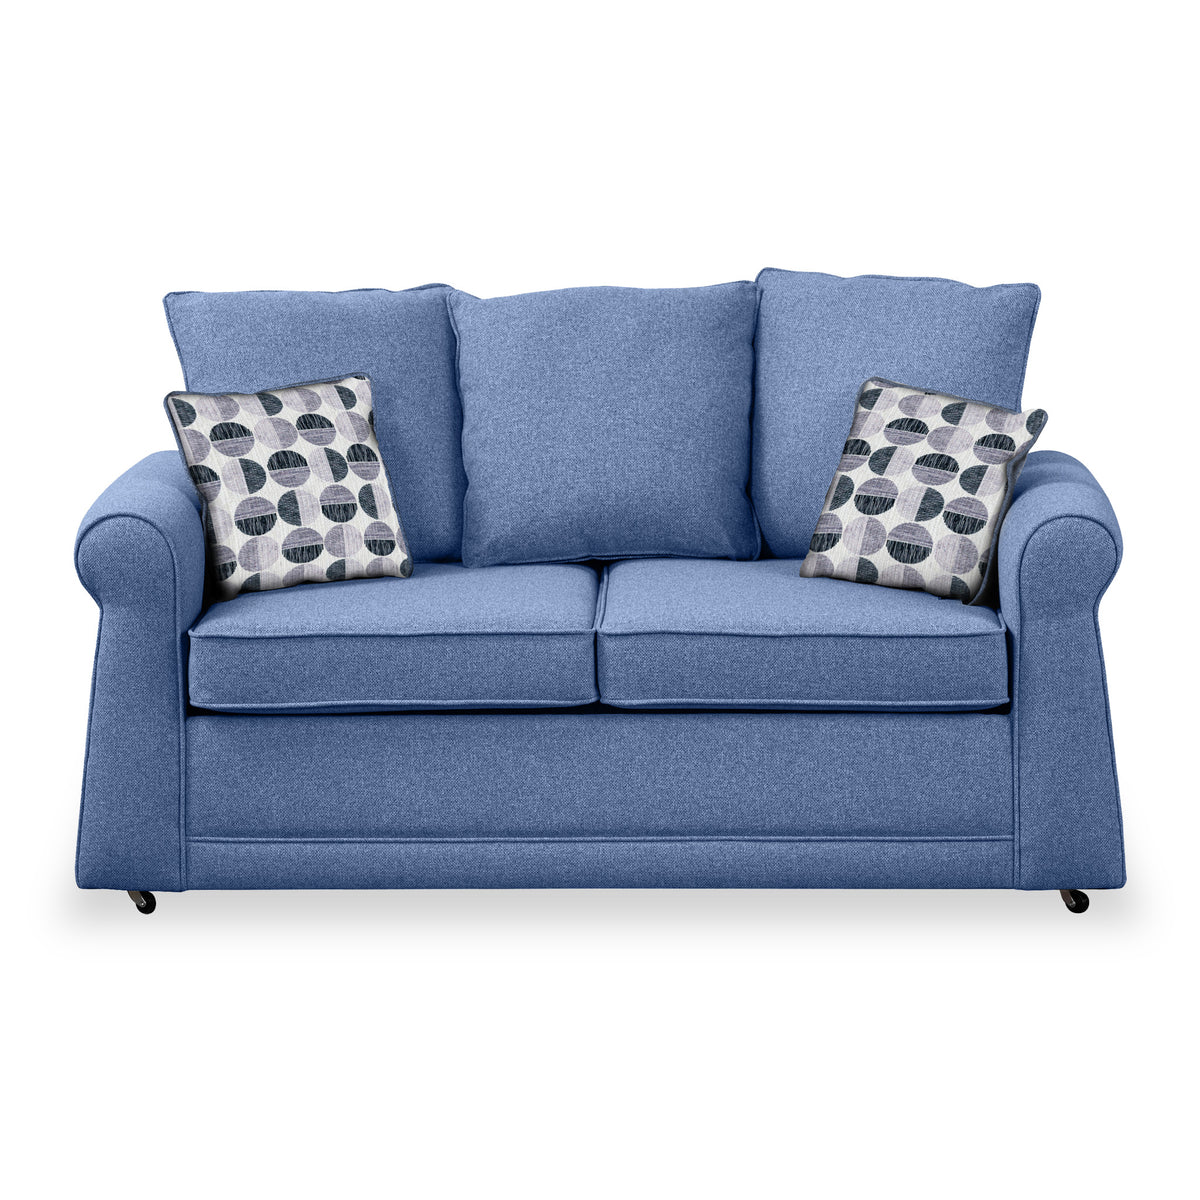 Broughton Denim Faux Linen 2 Seater Sofabed with Mono Scatter Cushions from Roseland Furniture